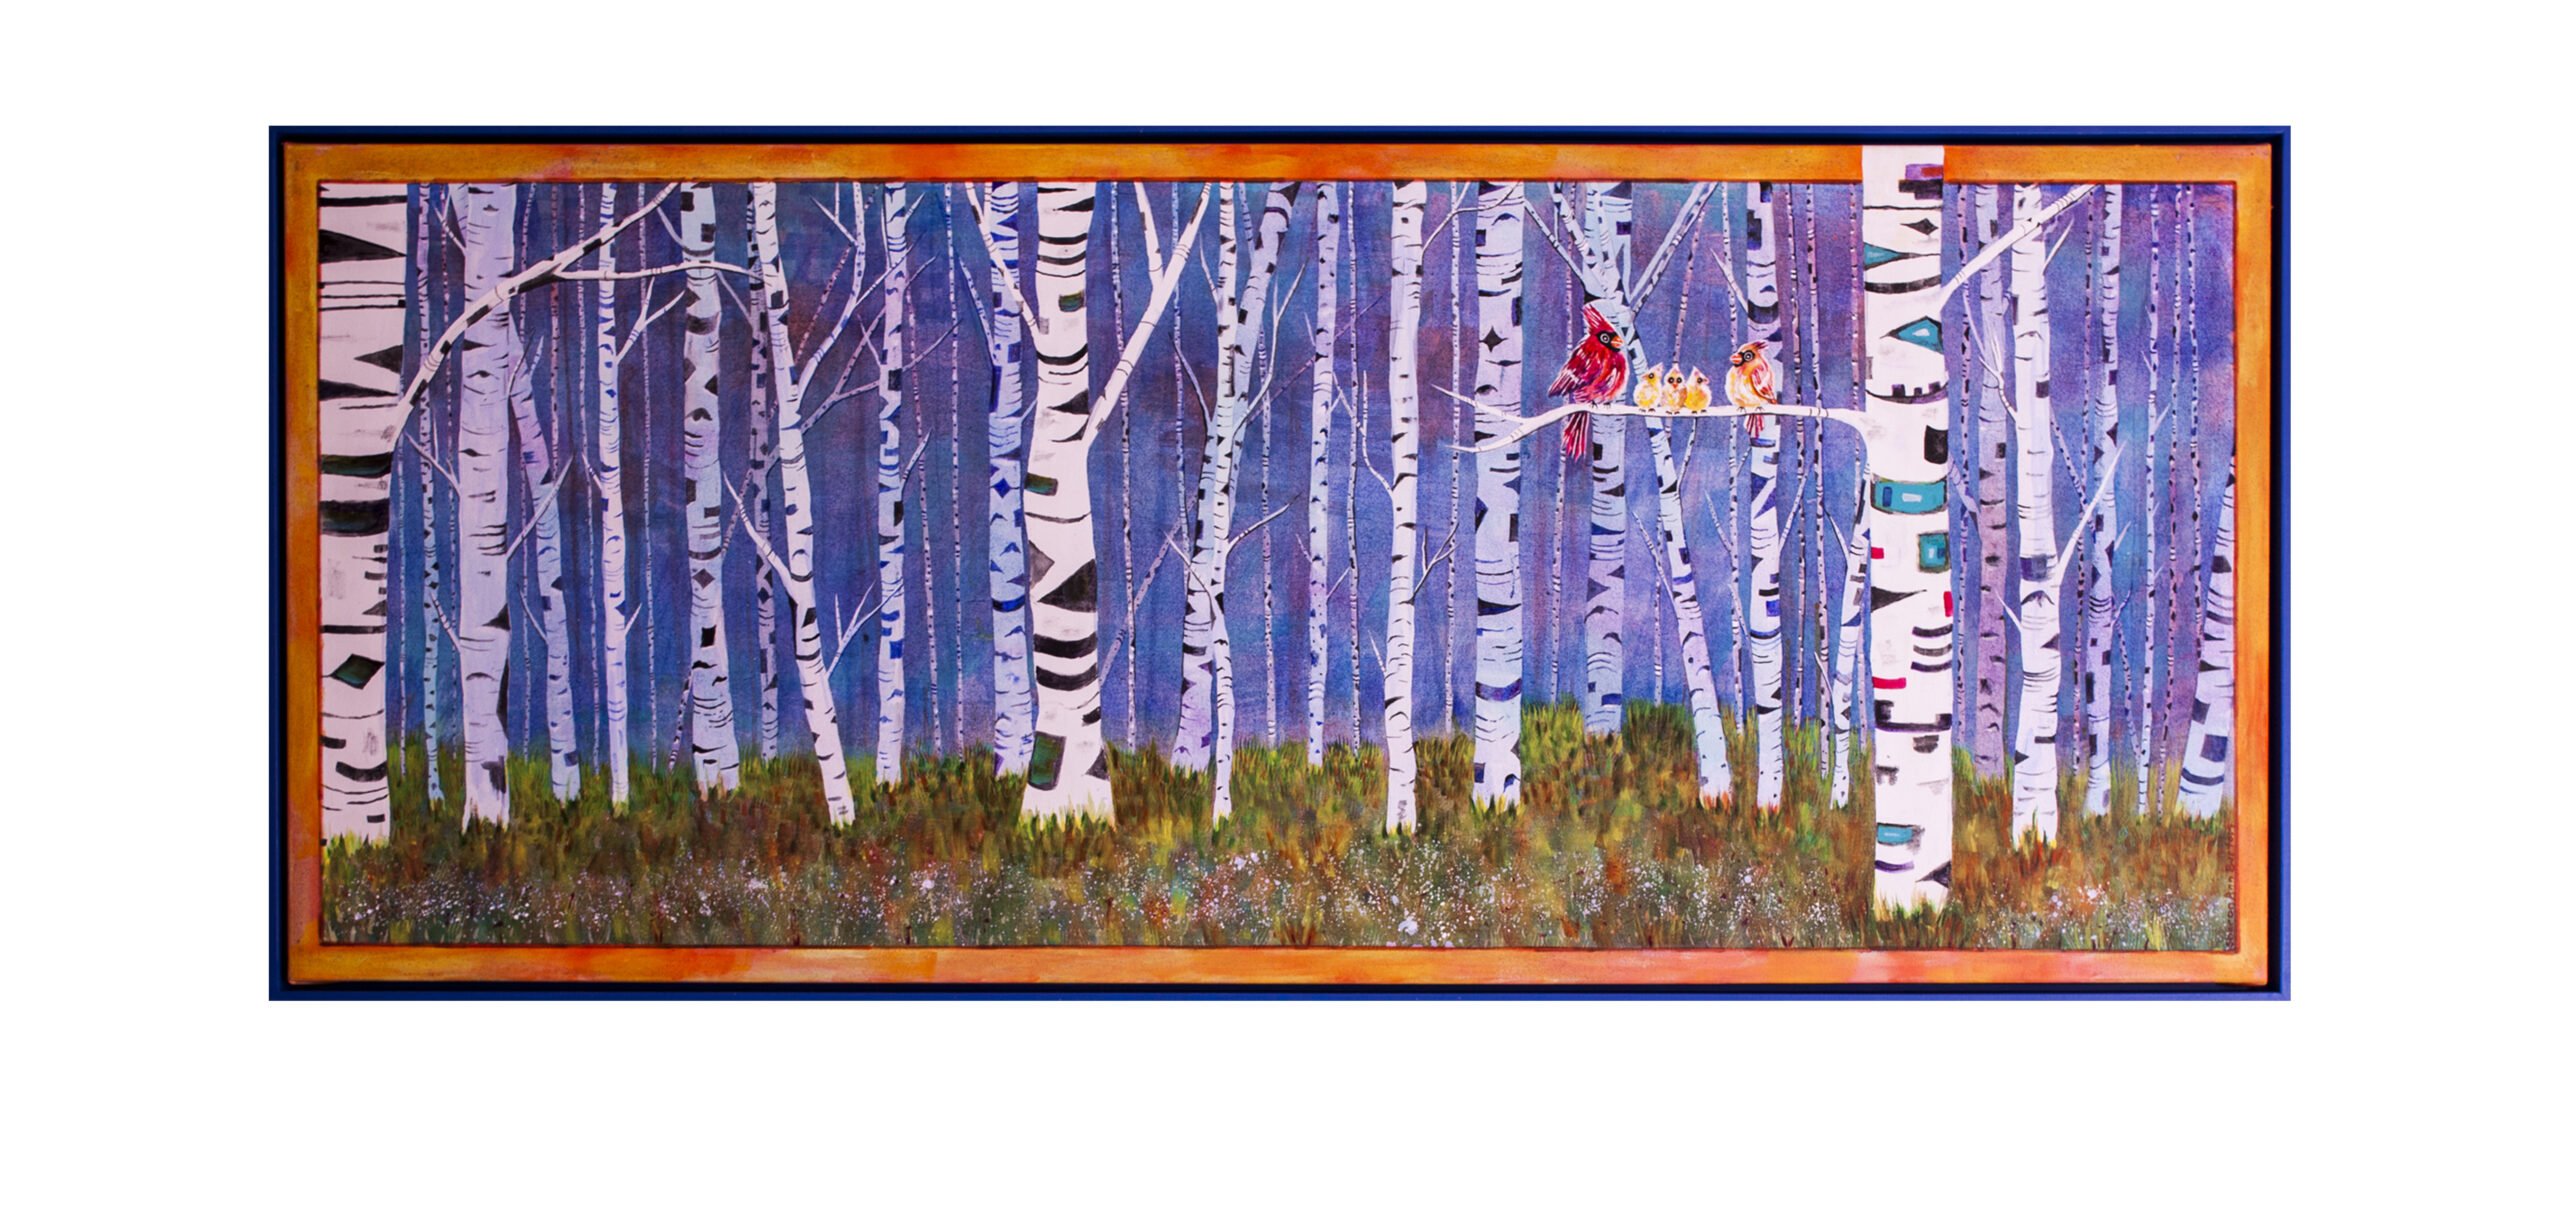 Birds Of A Feather - Acrylic on canvas - 60 inches x 24 inches - Printed card 9 inches x 4 inches